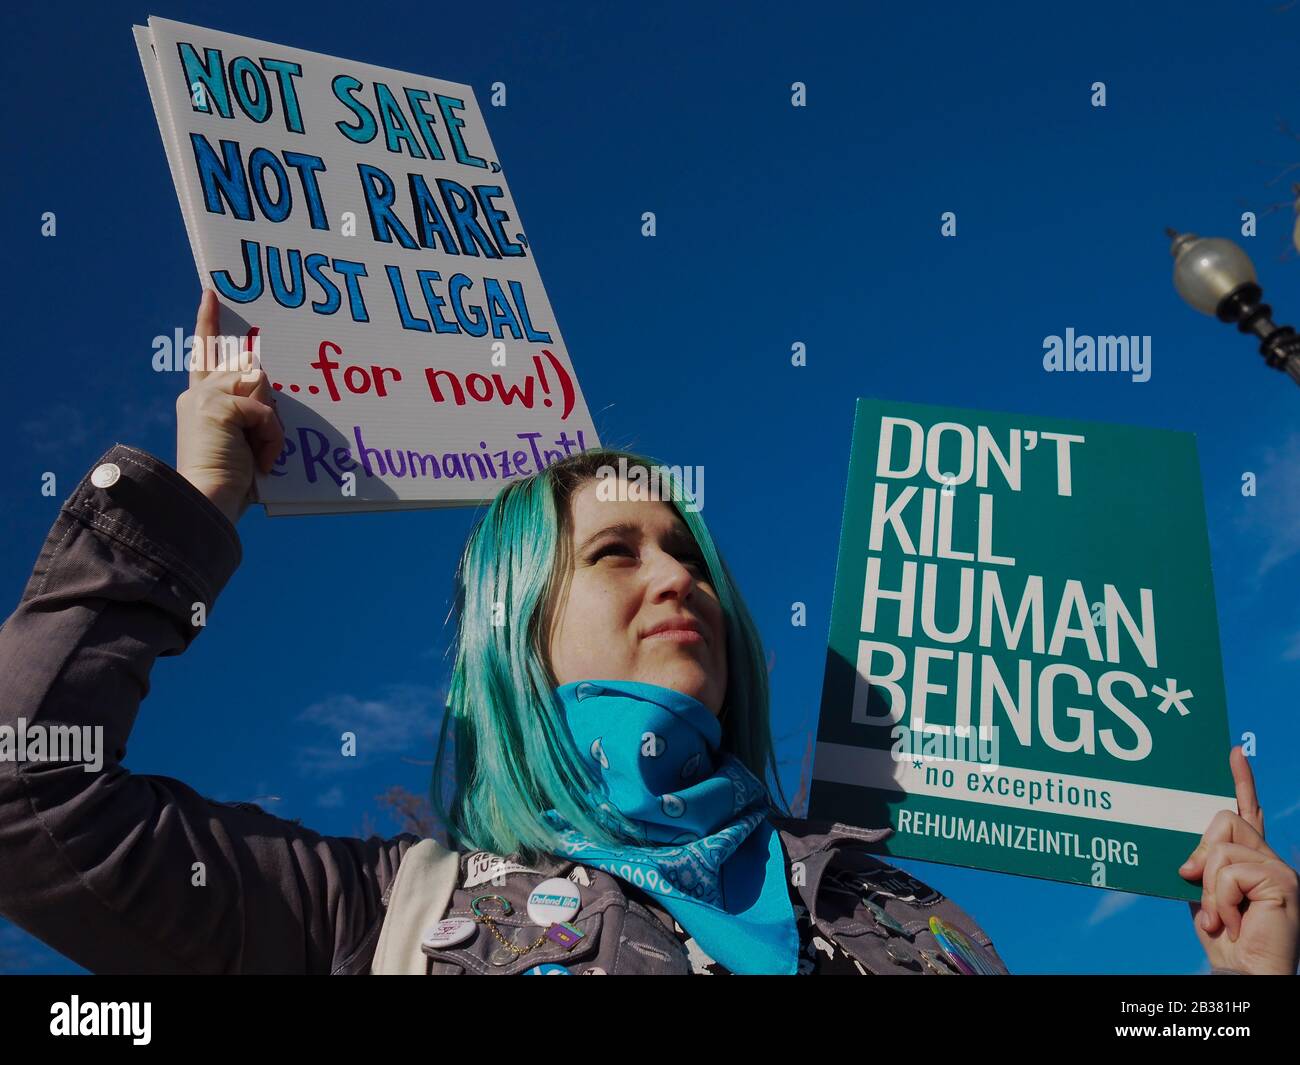 Washington, District of Columbia, USA. 4th Mar, 2020. A pro-life demonstrator voices her views in front of the US Supreme Court Credit: Sue Dorfman/ZUMA Wire/Alamy Live News Stock Photo